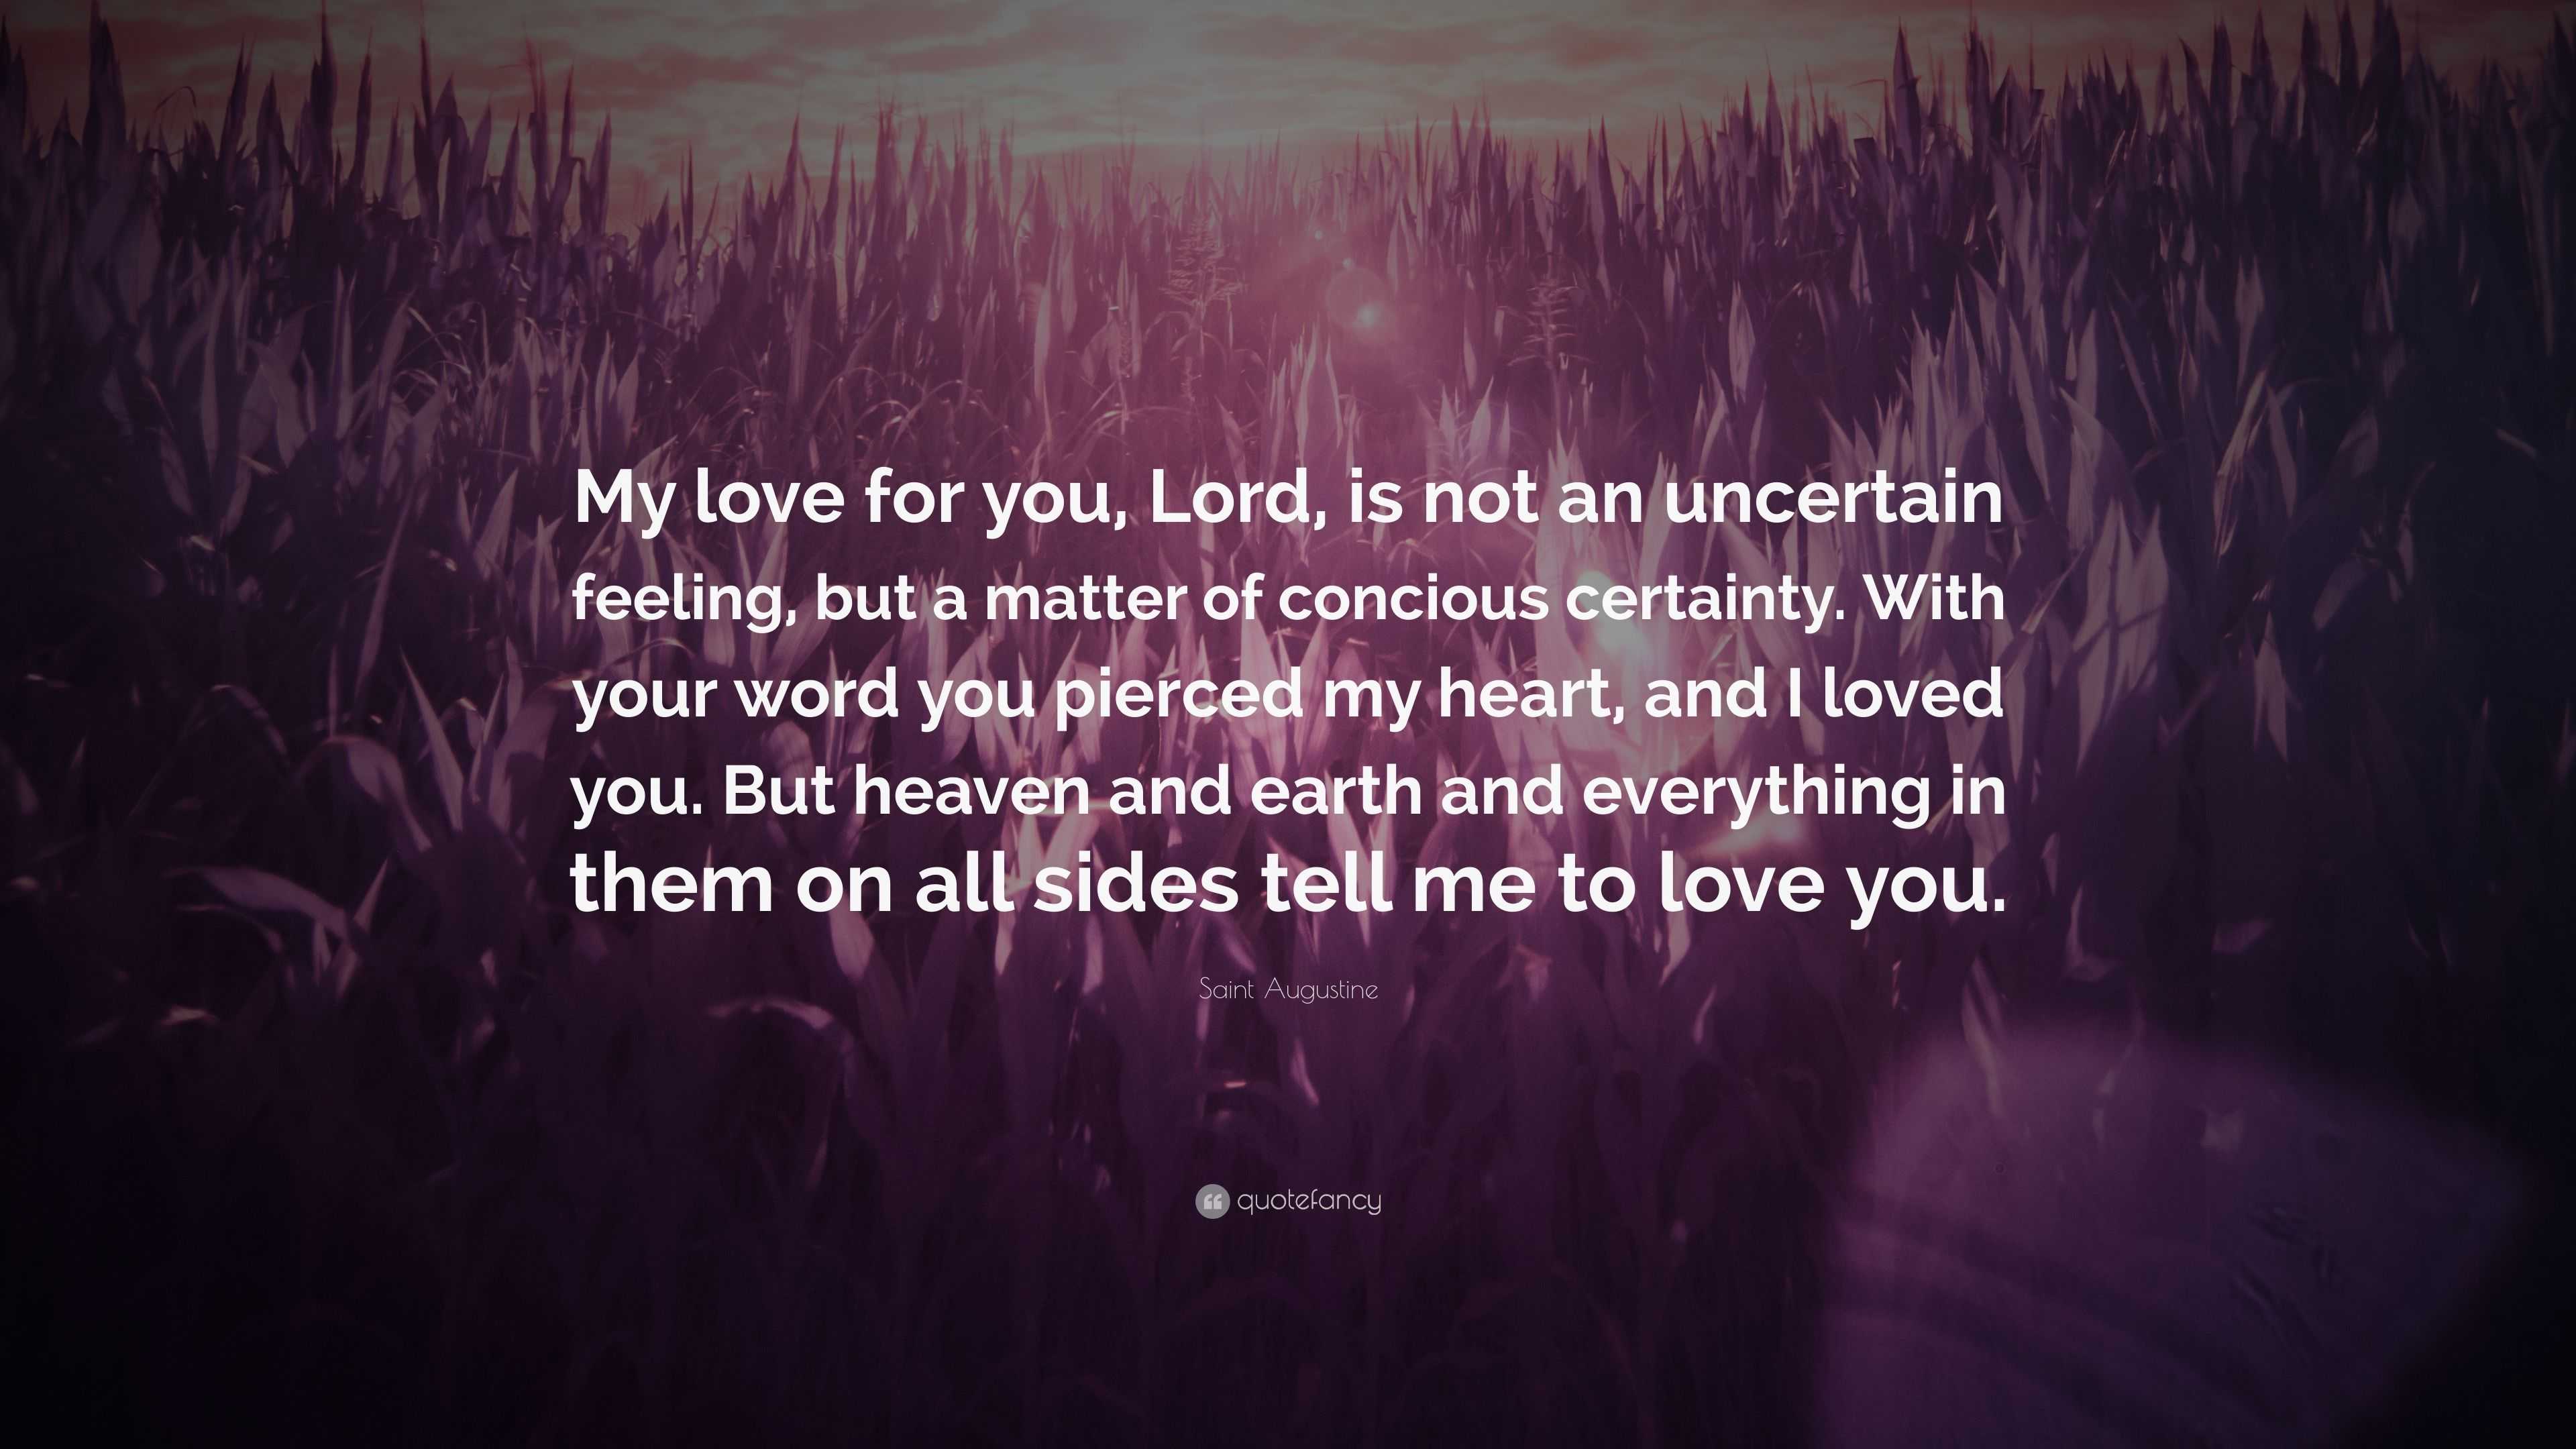 Saint Augustine Quote “My love for you Lord is not an uncertain